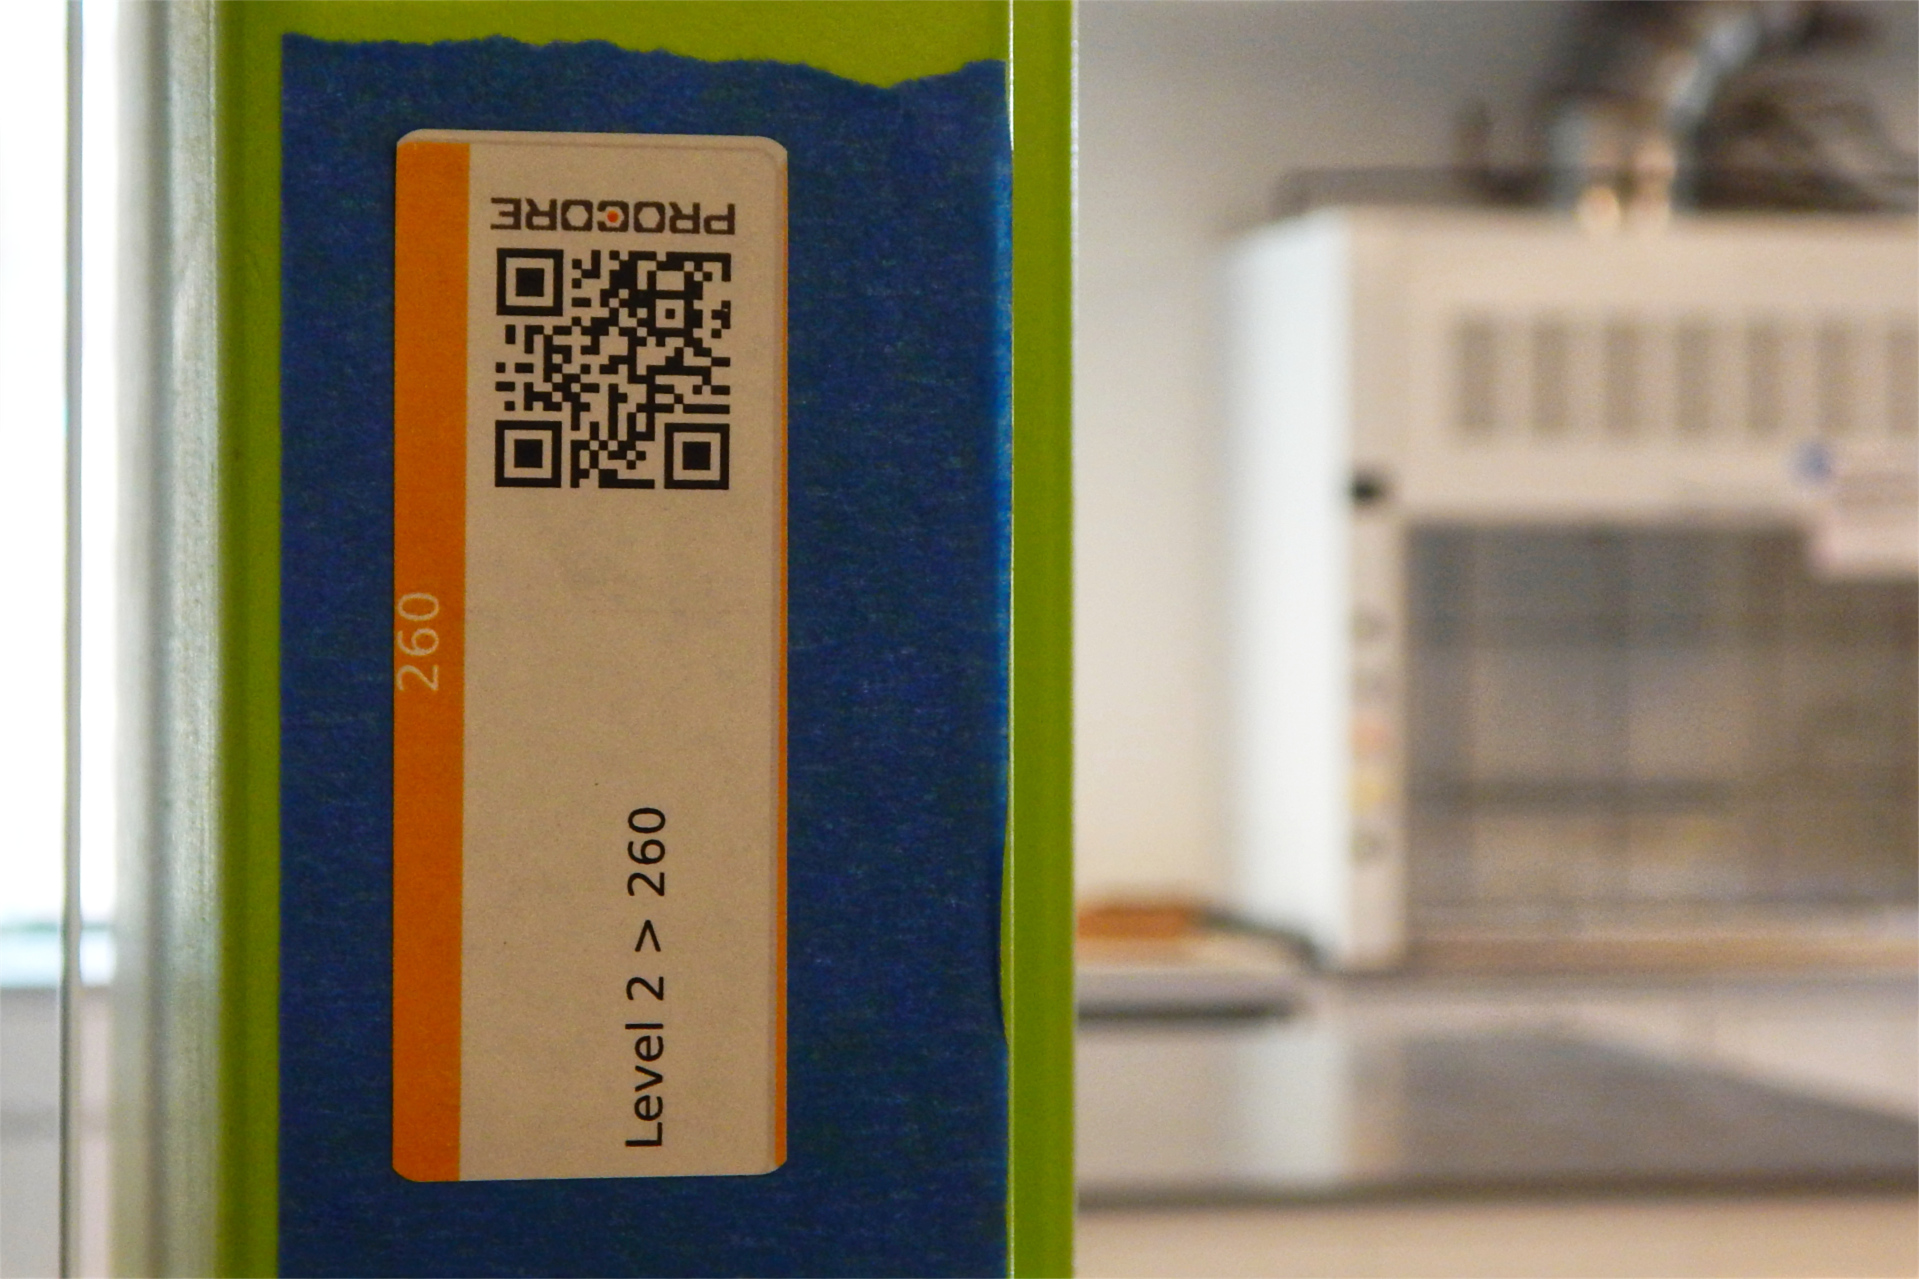 Scanning this Procore QR code assigned to a lab on the Bonney Center’s second floor produces all manner of information about the status of work there. (Doug Hubley/Bates College)